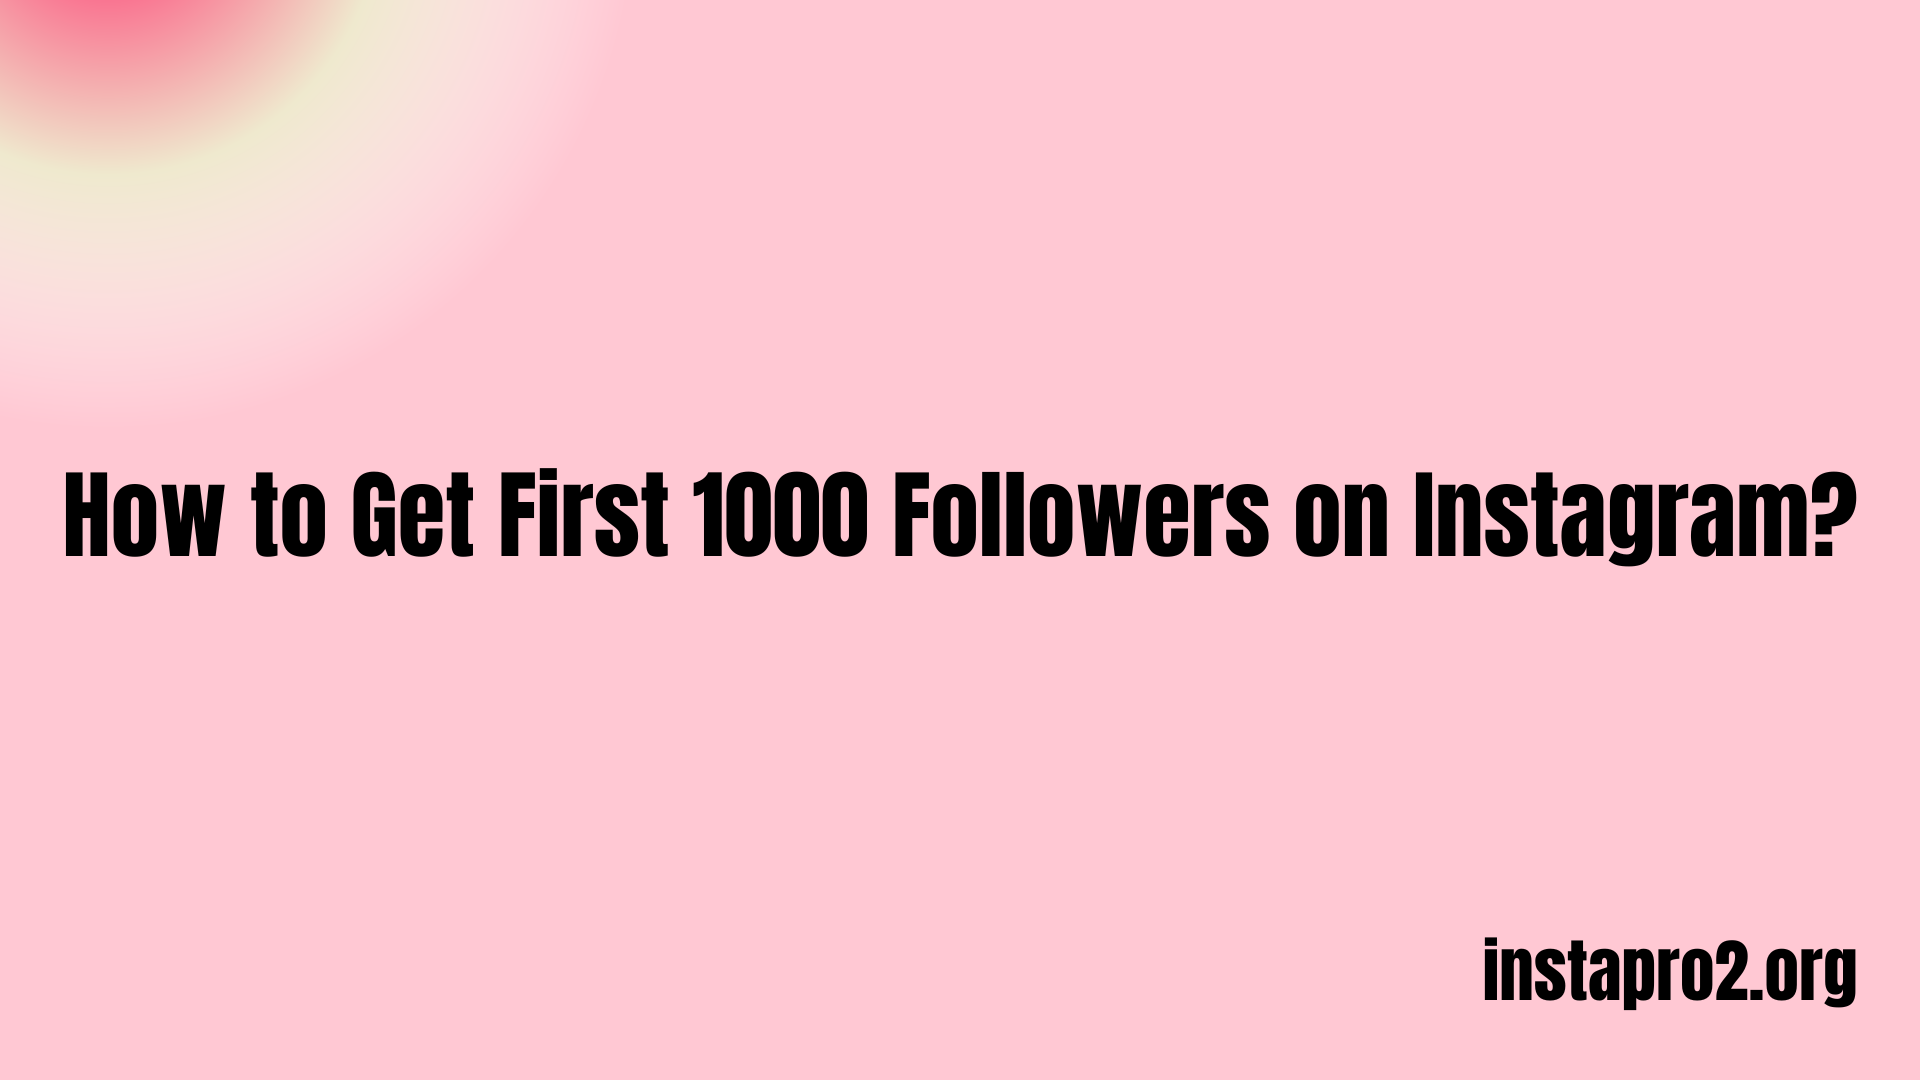 How to Get First 1000 Followers on Instagram?